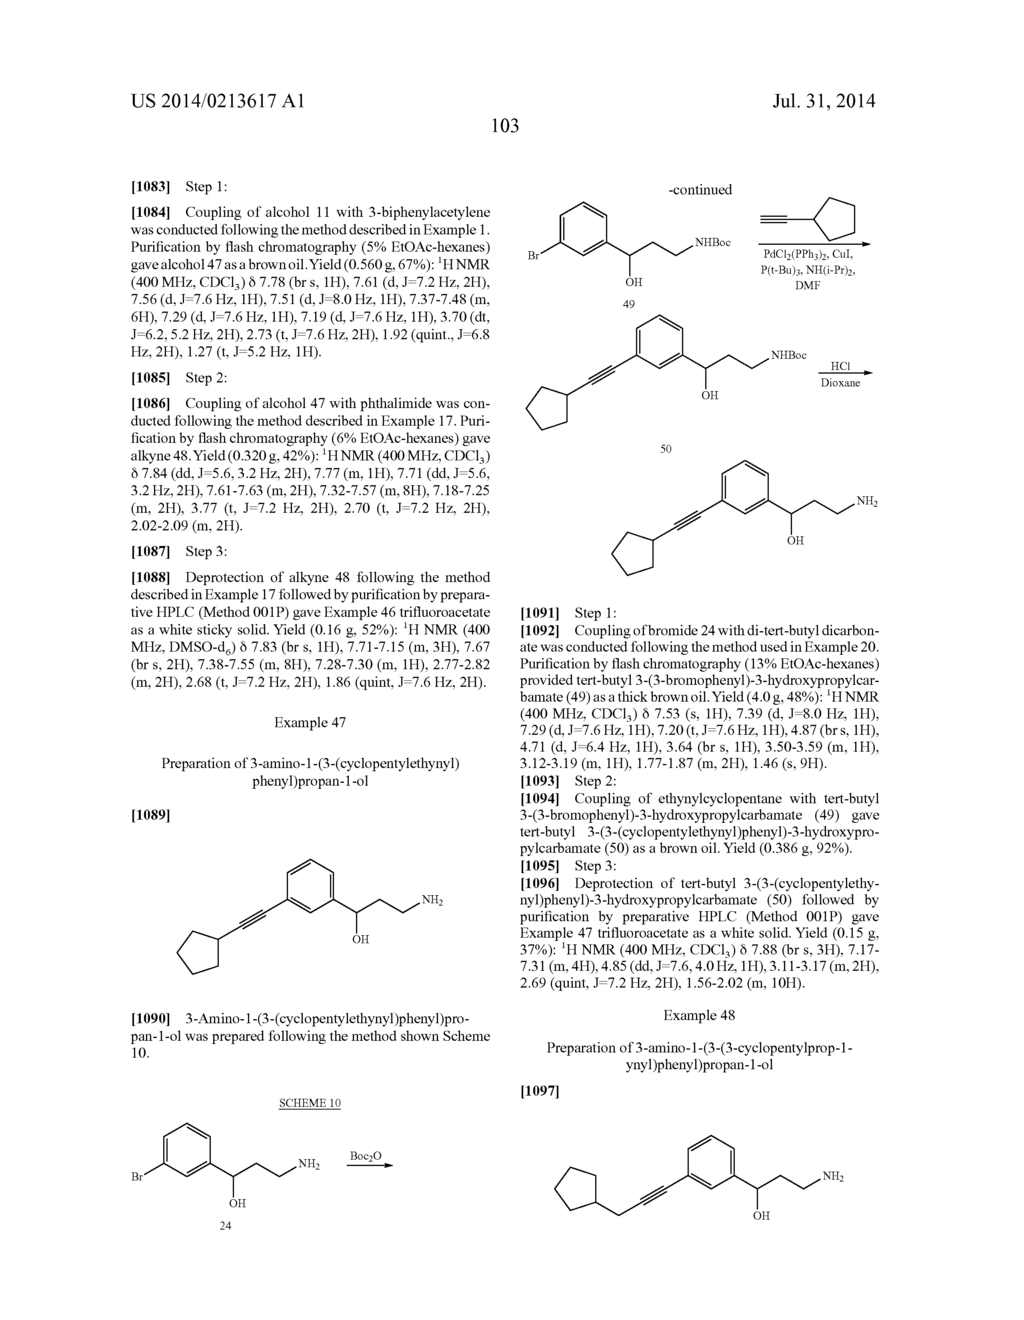 ALKYNYL PHENYL DERIVATIVE COMPOUNDS FOR TREATING OPHTHALMIC DISEASES AND     DISORDERS - diagram, schematic, and image 118